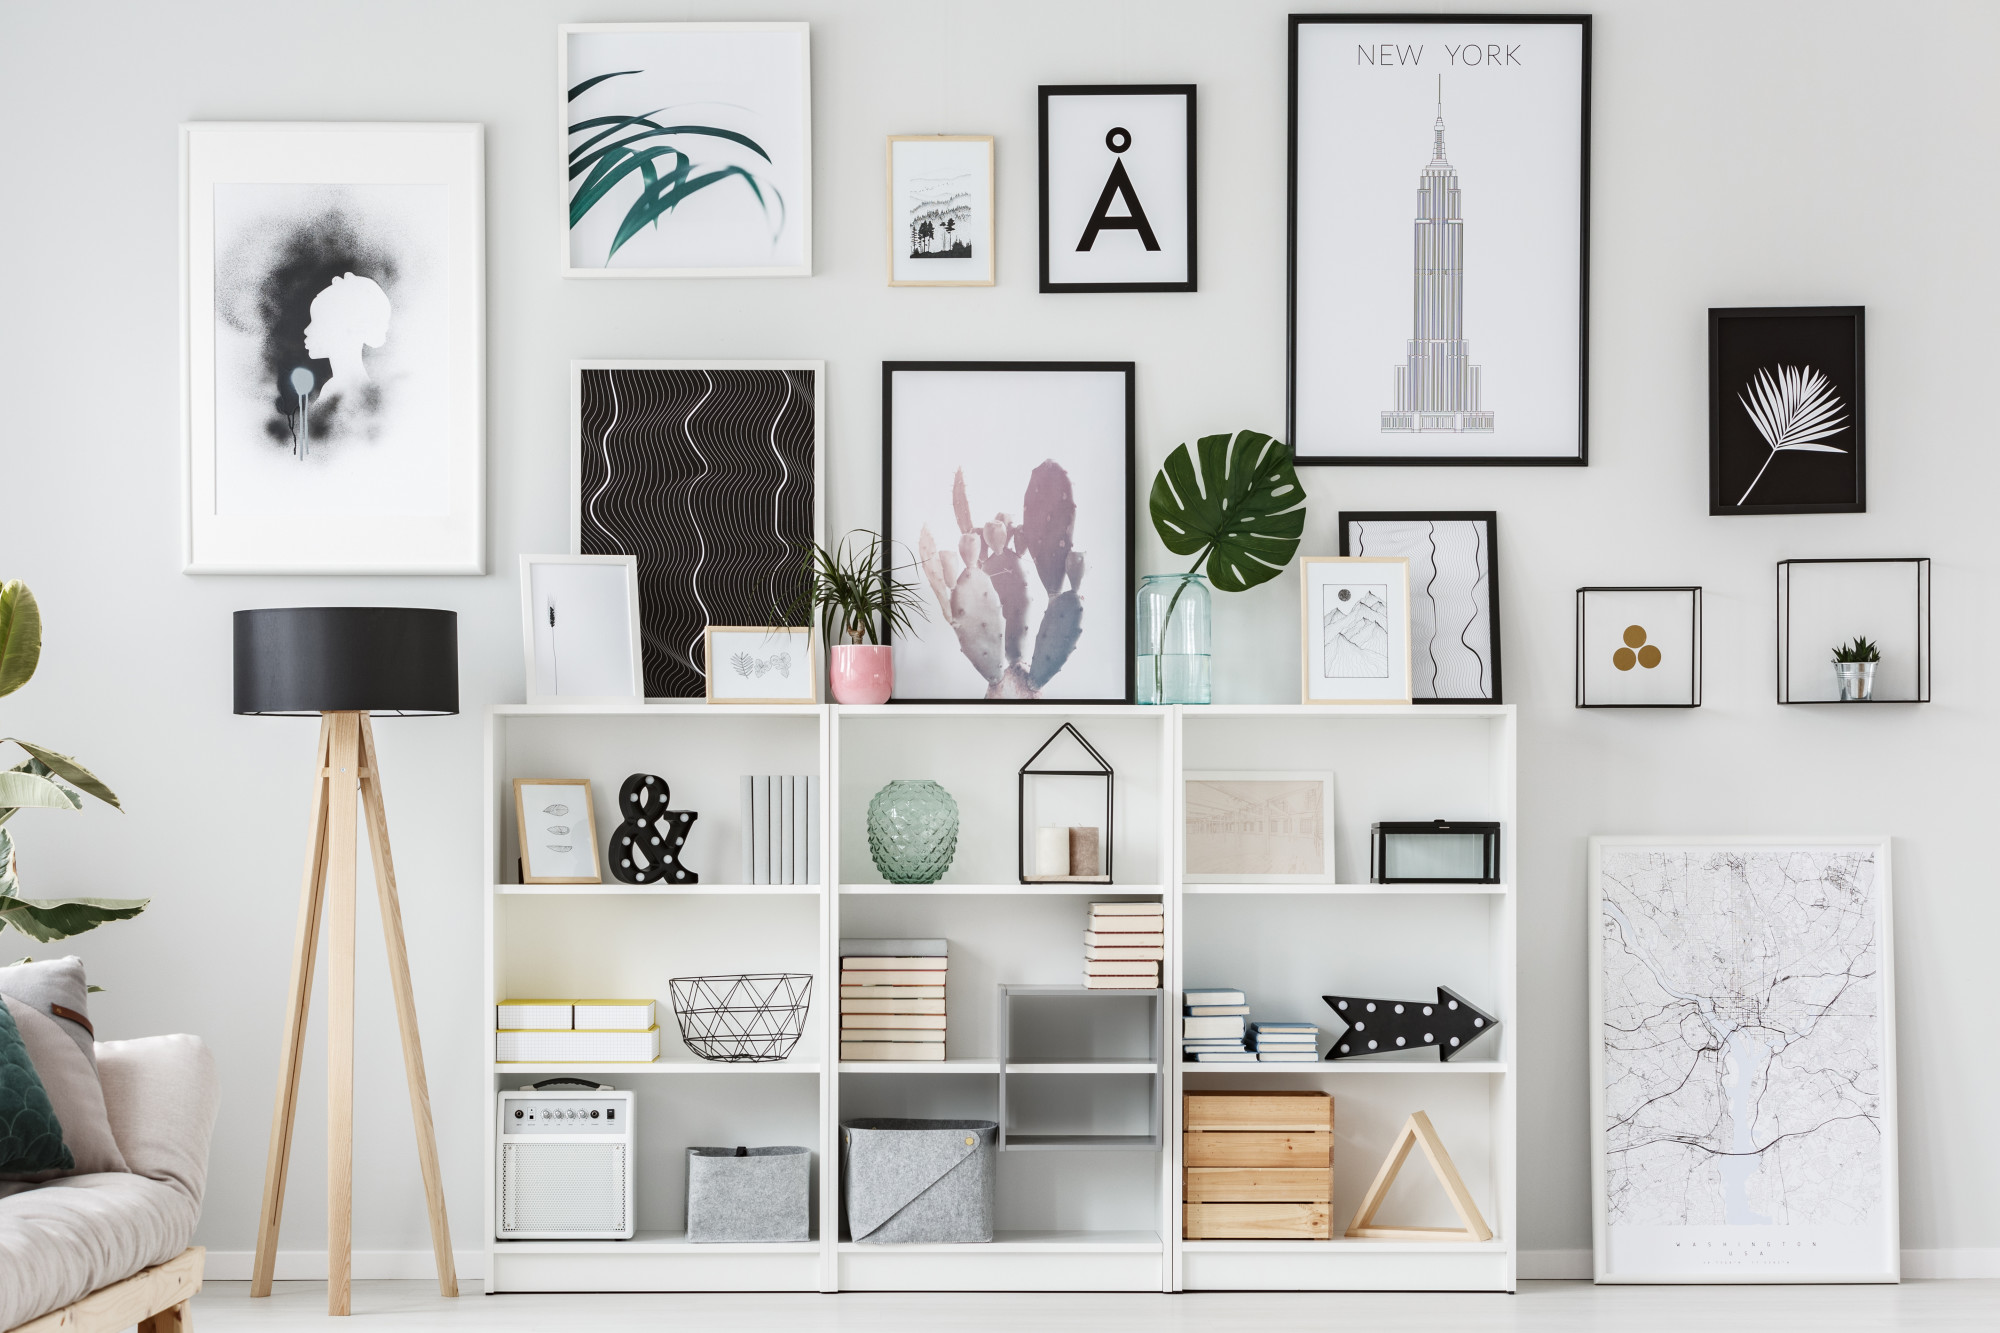 A bright white room with shelves full of books and accessories, and prints hanging on the wall